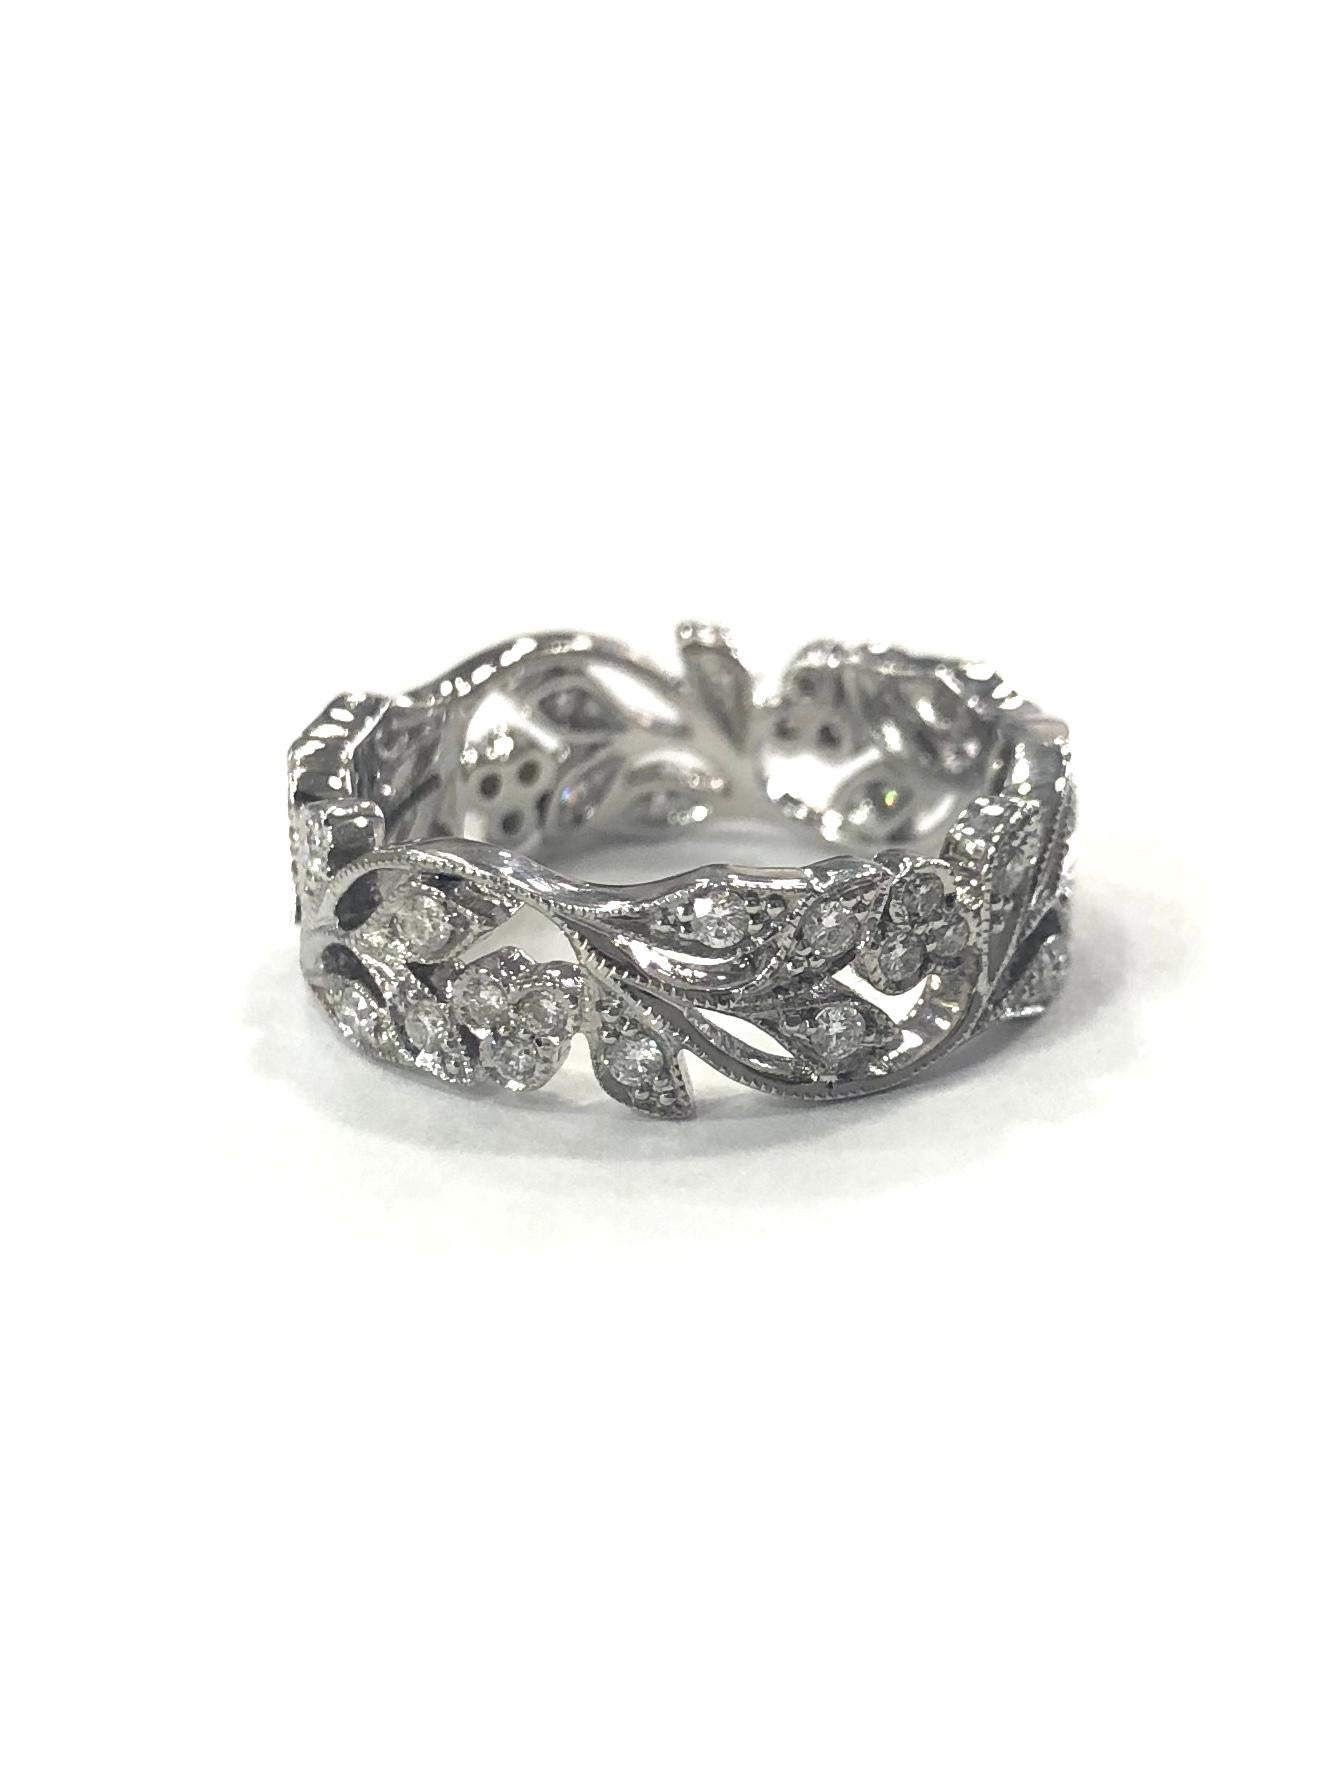 18ct White Gold Diamond Set Floral Design Band Ring. Edwardian Style.
Set with round brilliant cut diamonds in a Milgrain setting.

Approximate total diamond weight : 1.60ct

Width : 6mm
Ring Size : O
Total Weight : 5.3g